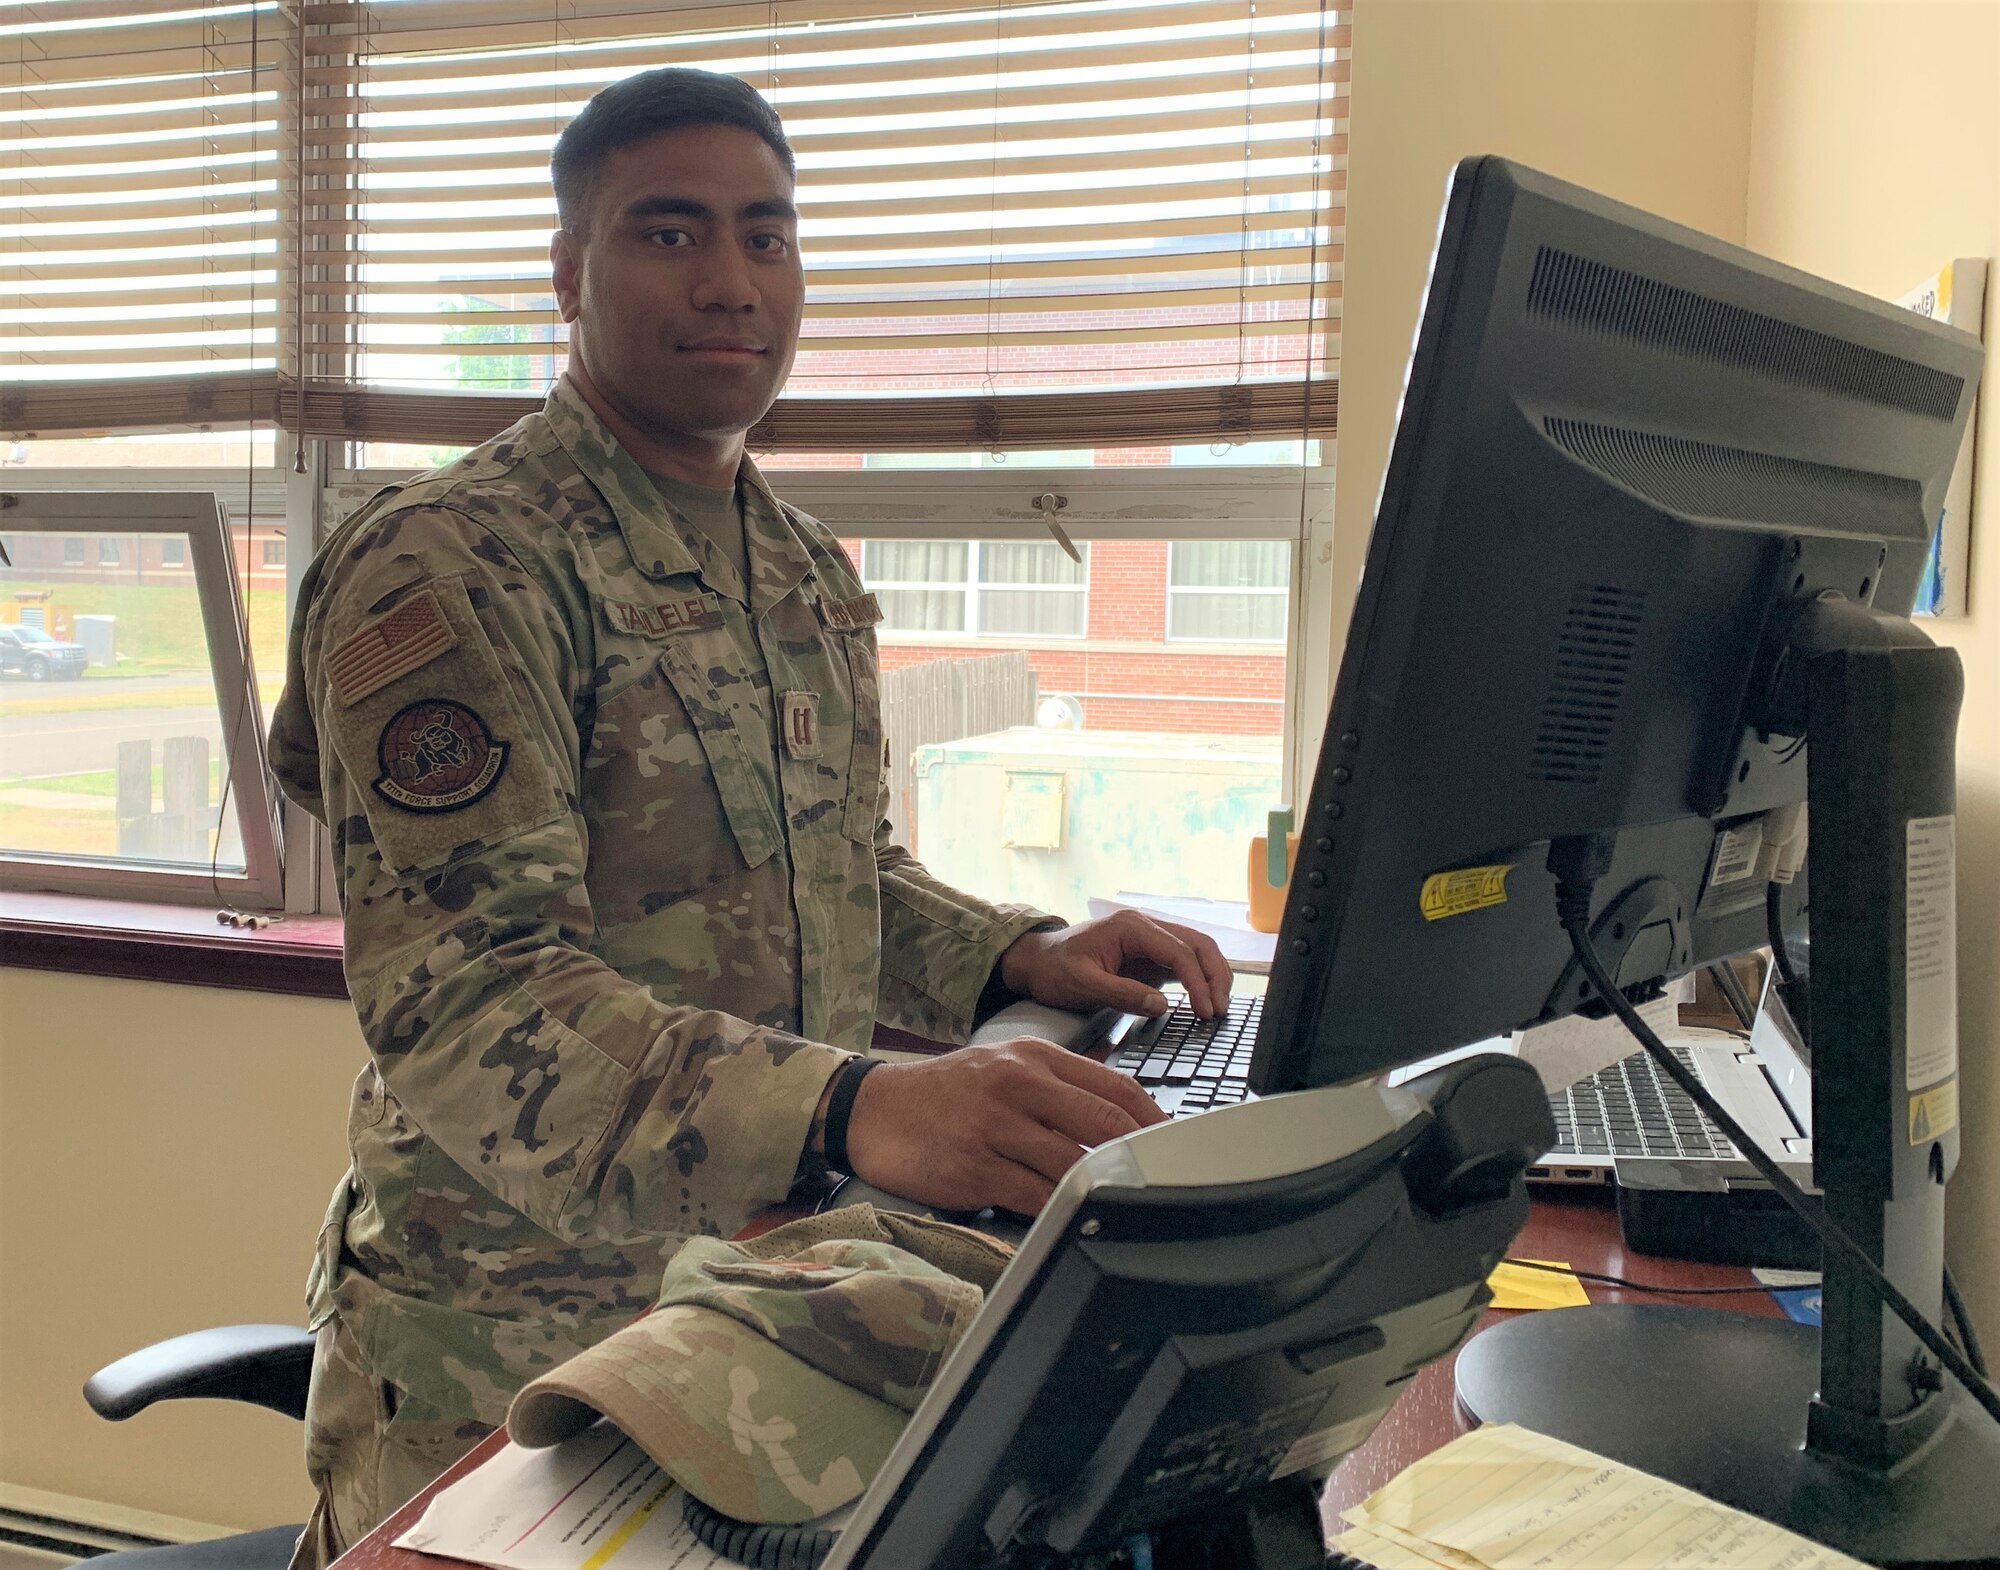 Man in military uniform standing at desk in front of computer.